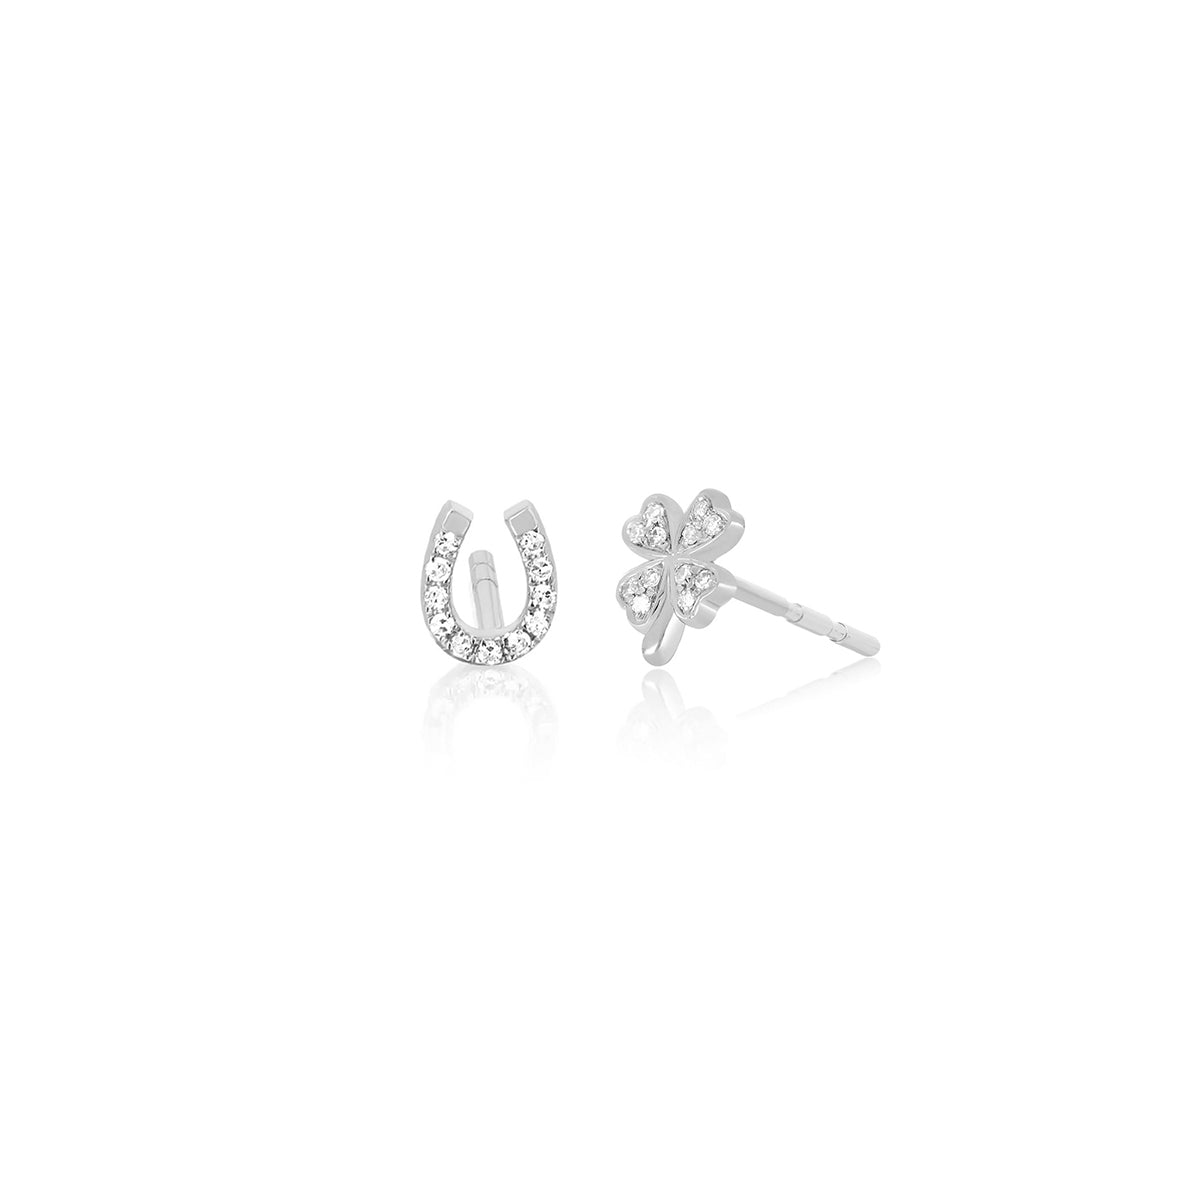 The Lucky Set in 14k White Gold featuring 1 Horse Shoe Stud and 1 Clover Stud